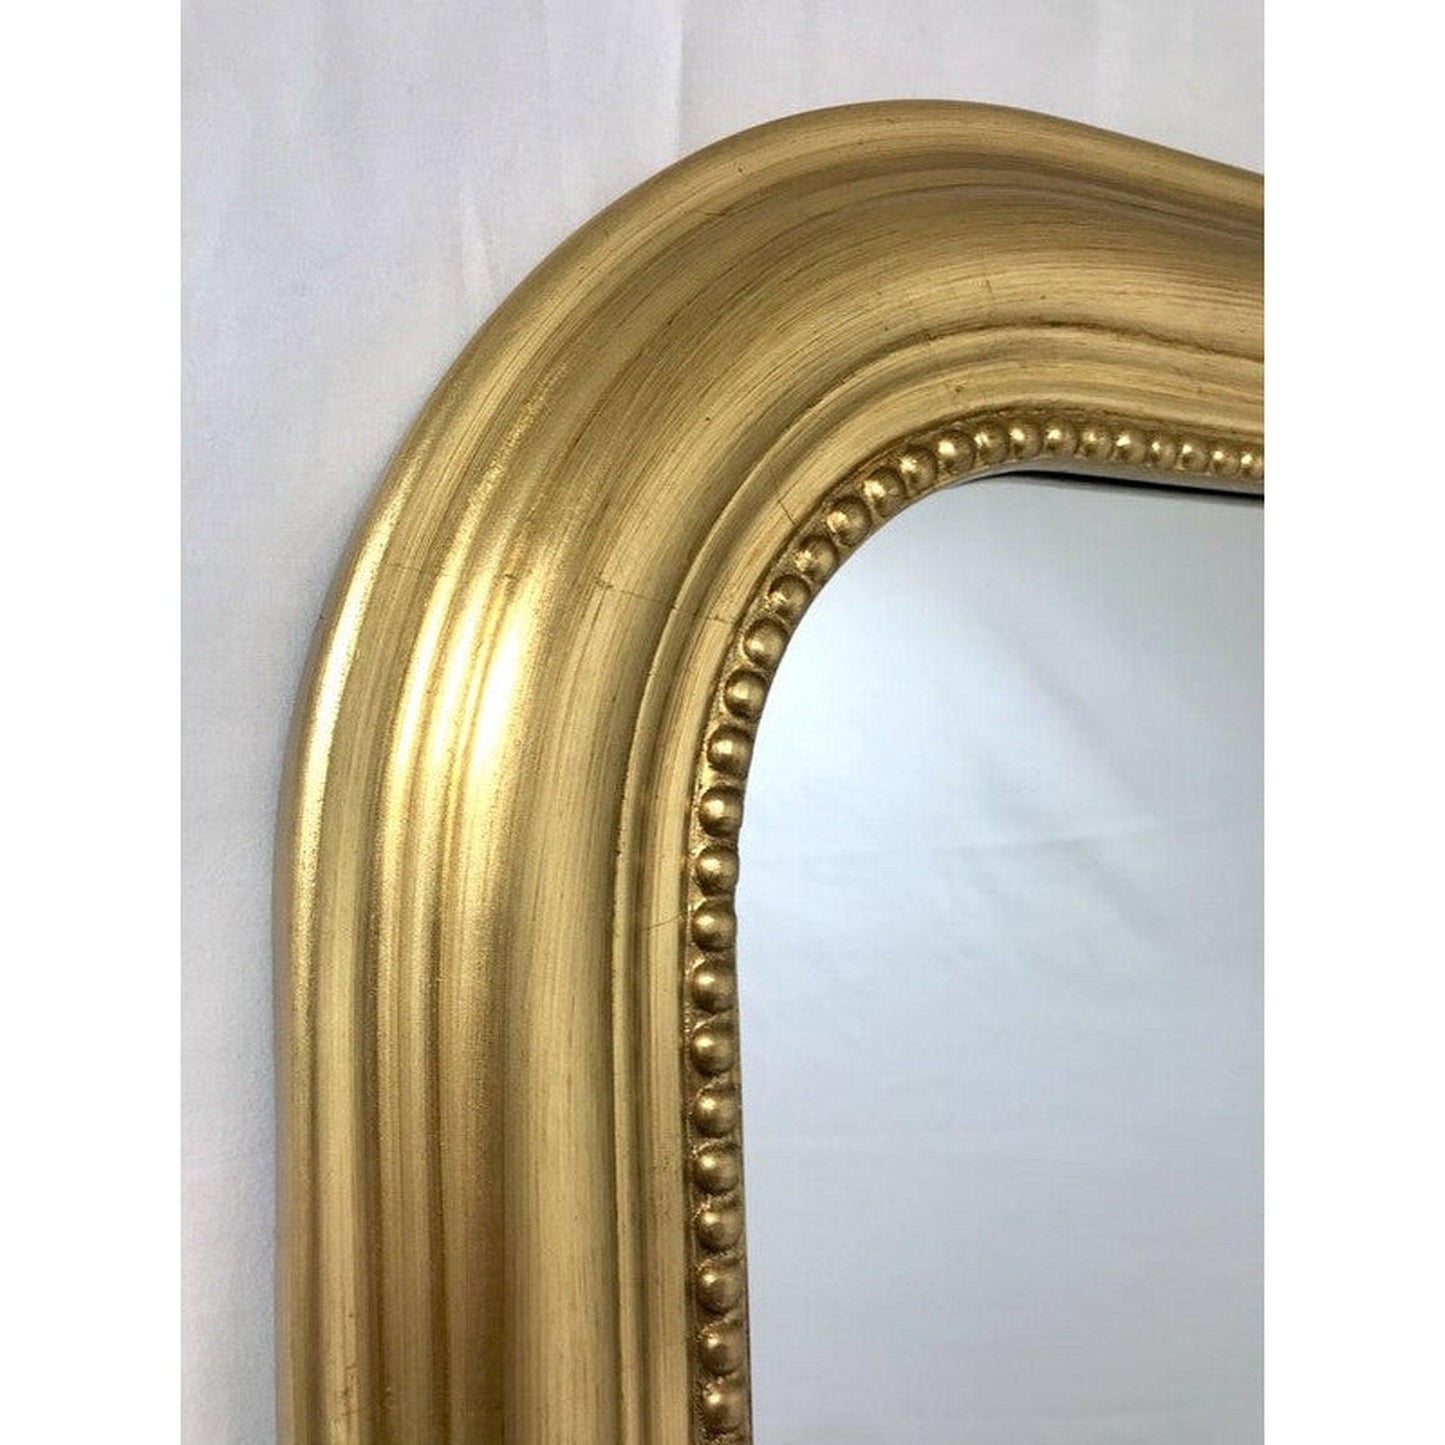 SBC Decor Duparc 31" x 48" Wall-Mounted Arched Wood Frame Accent Mirror In Gold Finish